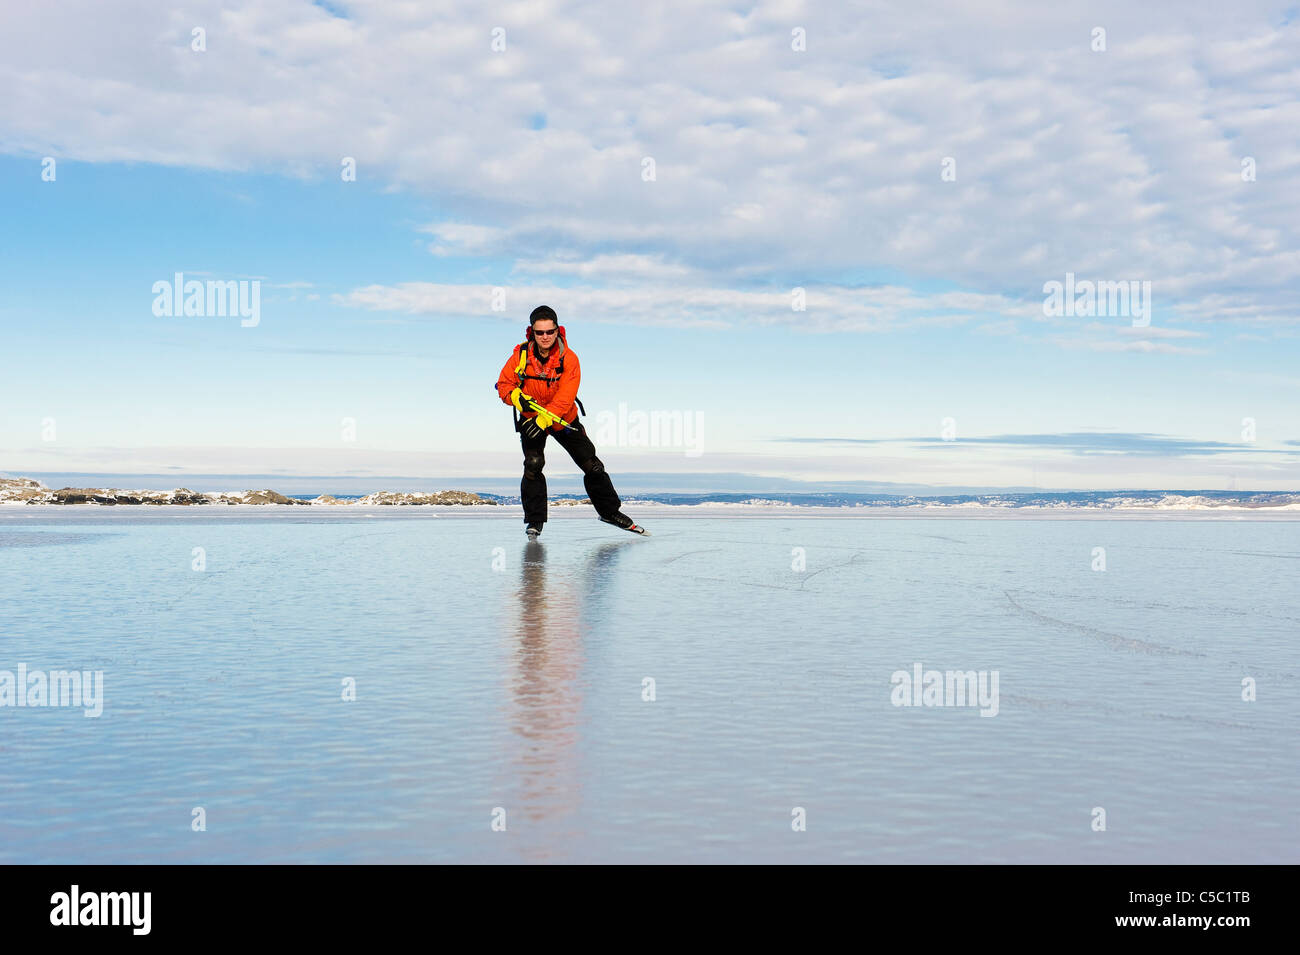 Skater on peaceful frozen lake below cloudy sky Stock Photo